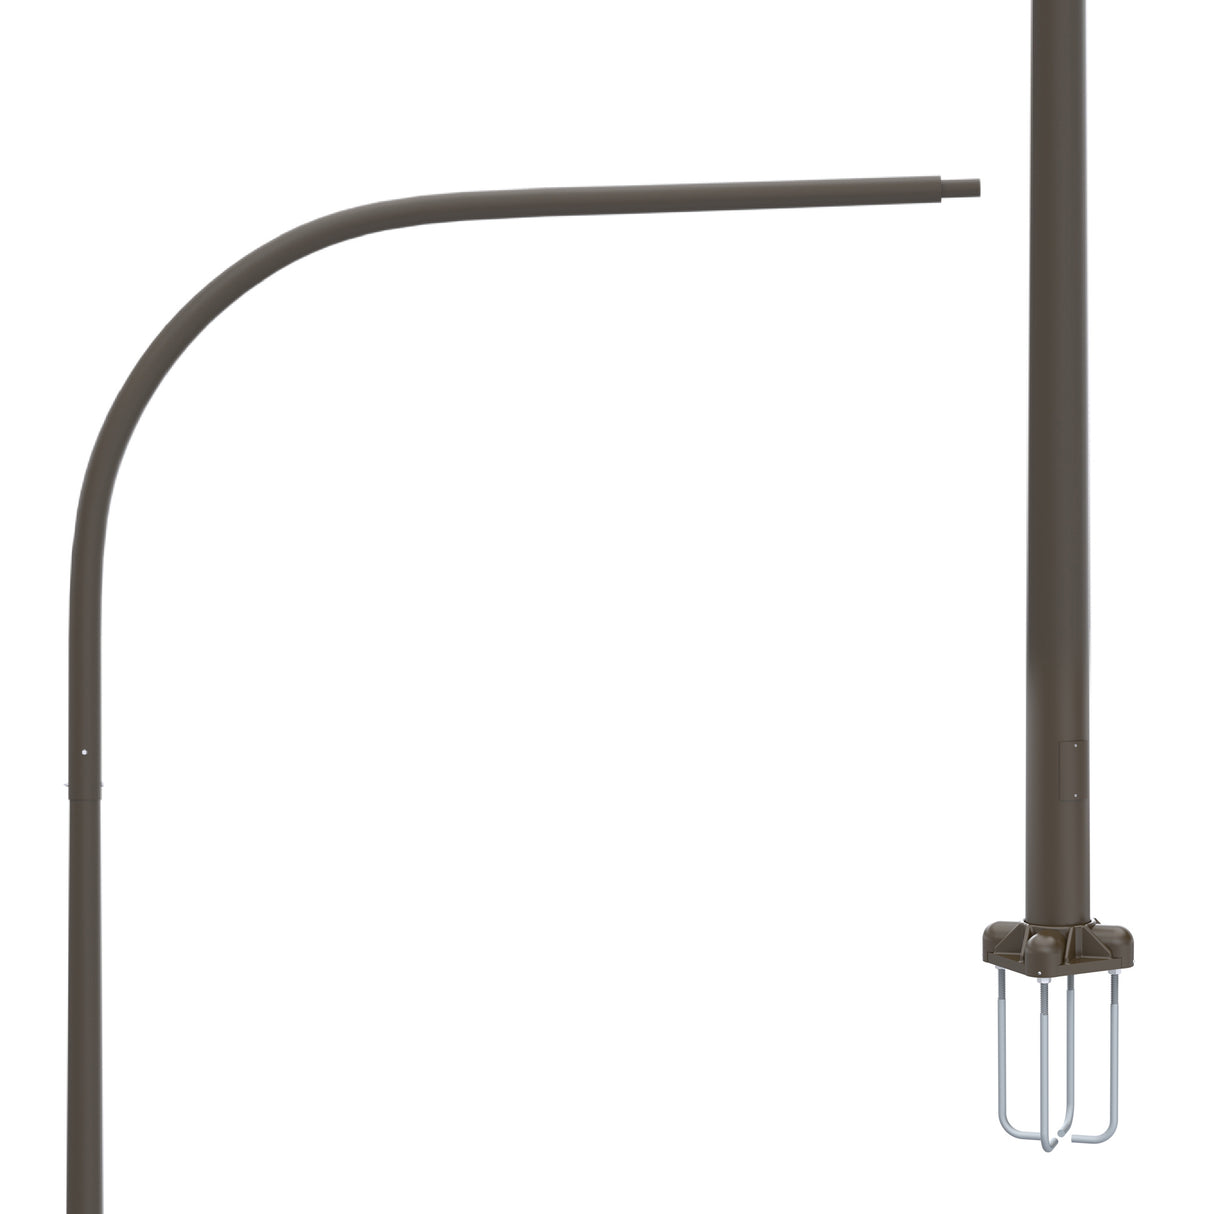 25' Tall x 7.0" Base OD x 4.0" Top OD x 0.156" Thick, Round Tapered Aluminum, Anchor Base Light Pole with 10' Davit Arm